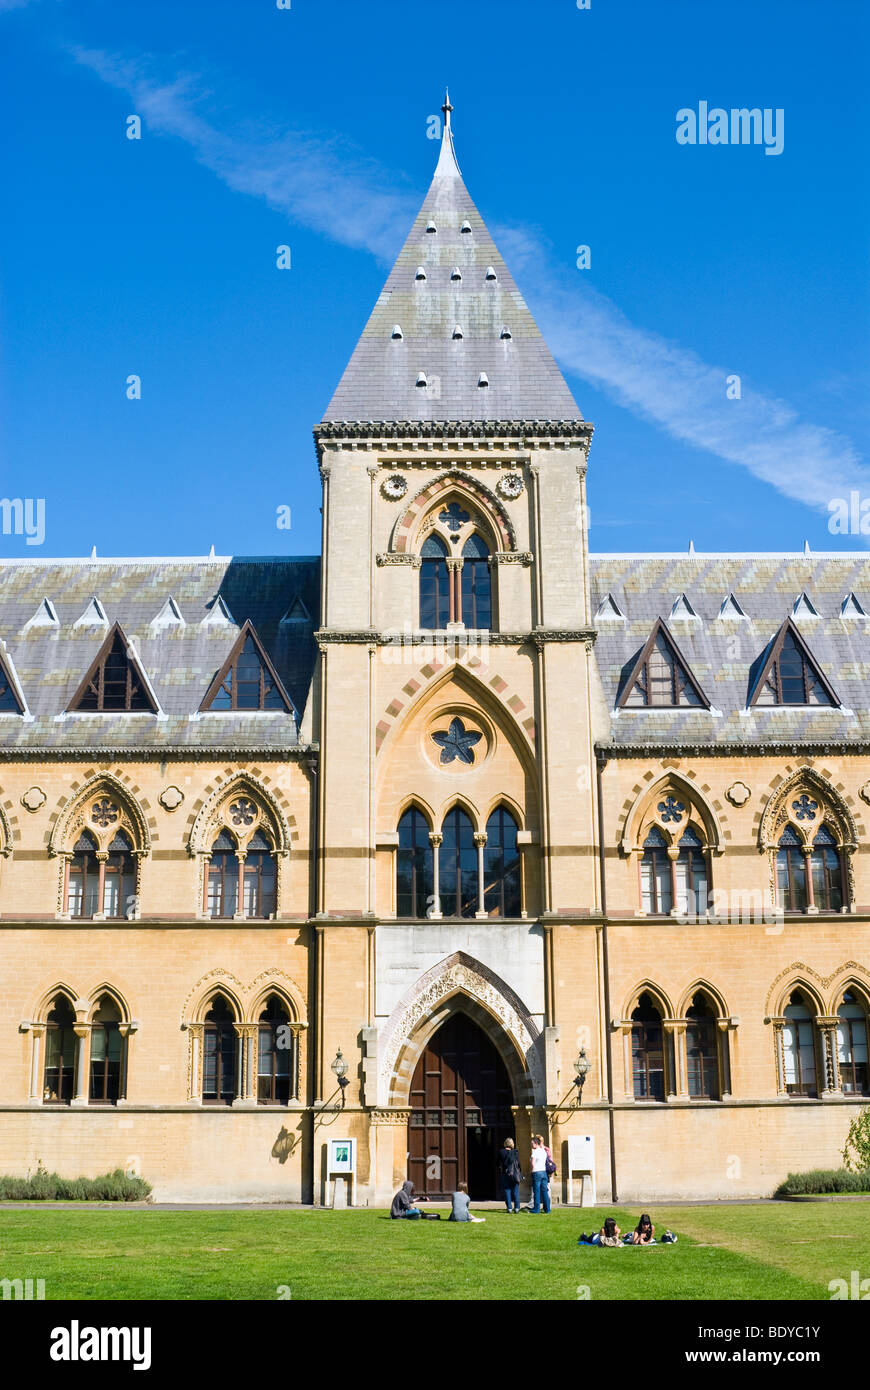 Die Oxford University Museum of Natural History und Pitt Rivers Museum, Oxford, England Stockfoto